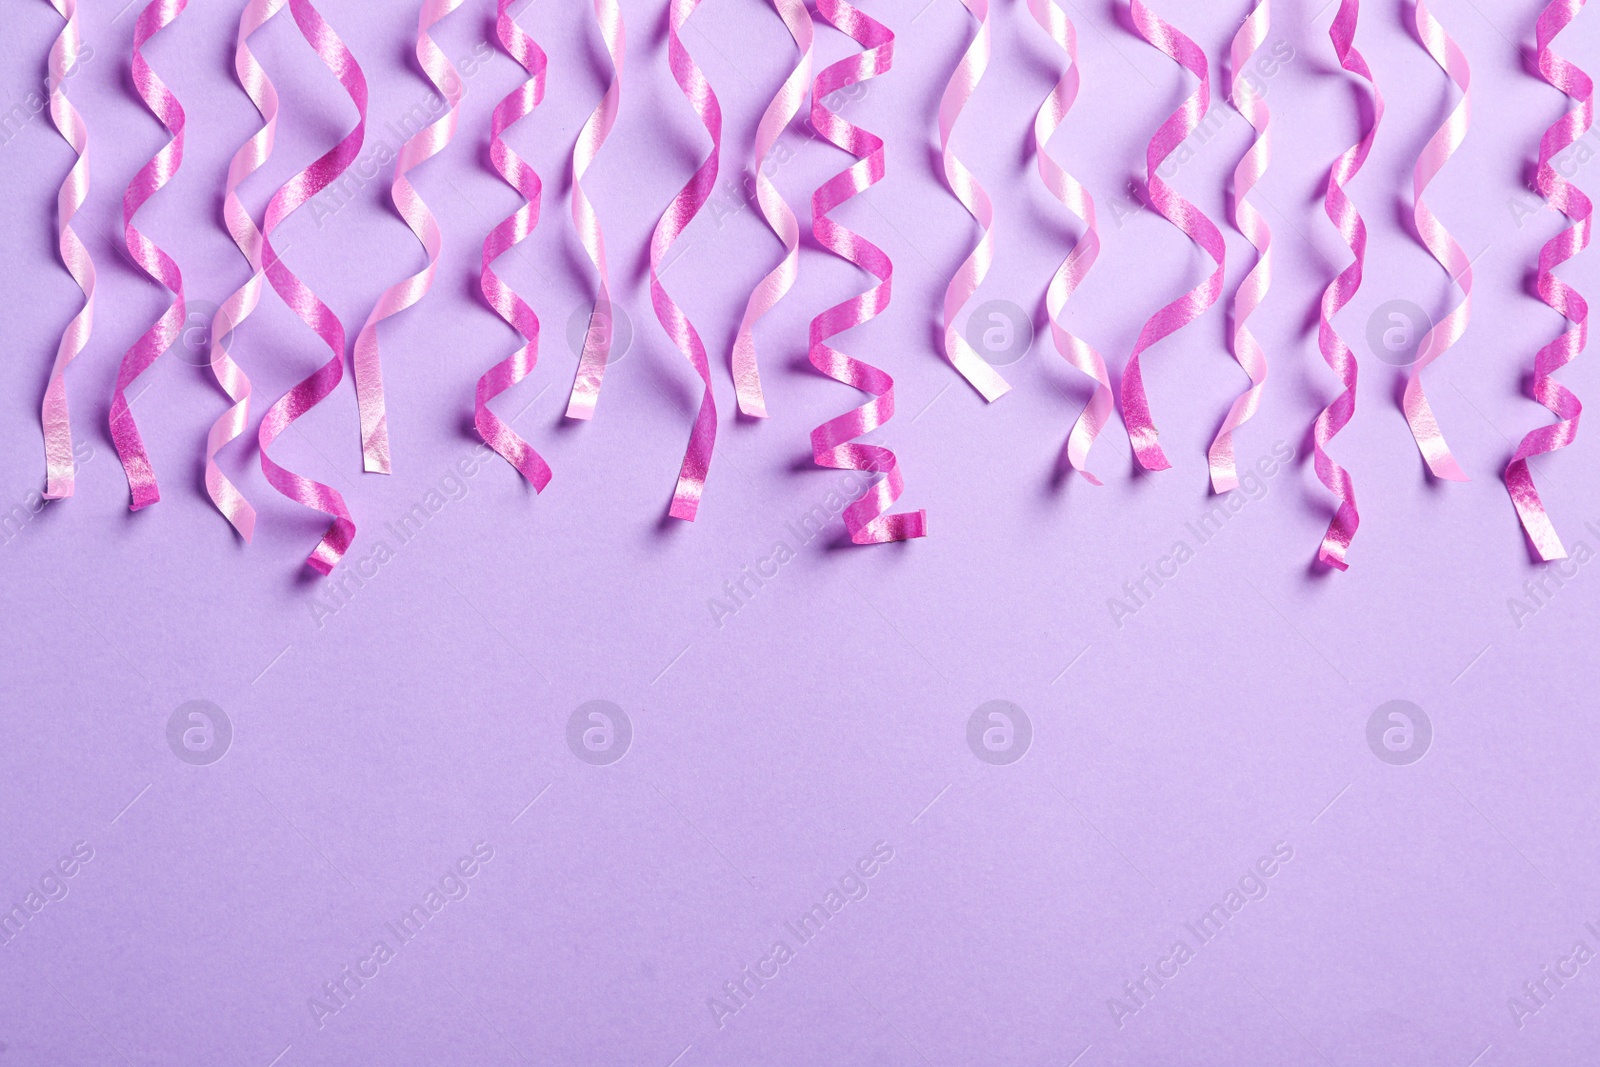 Photo of Pink serpentine streamers on light violet background, flat lay. Space for text